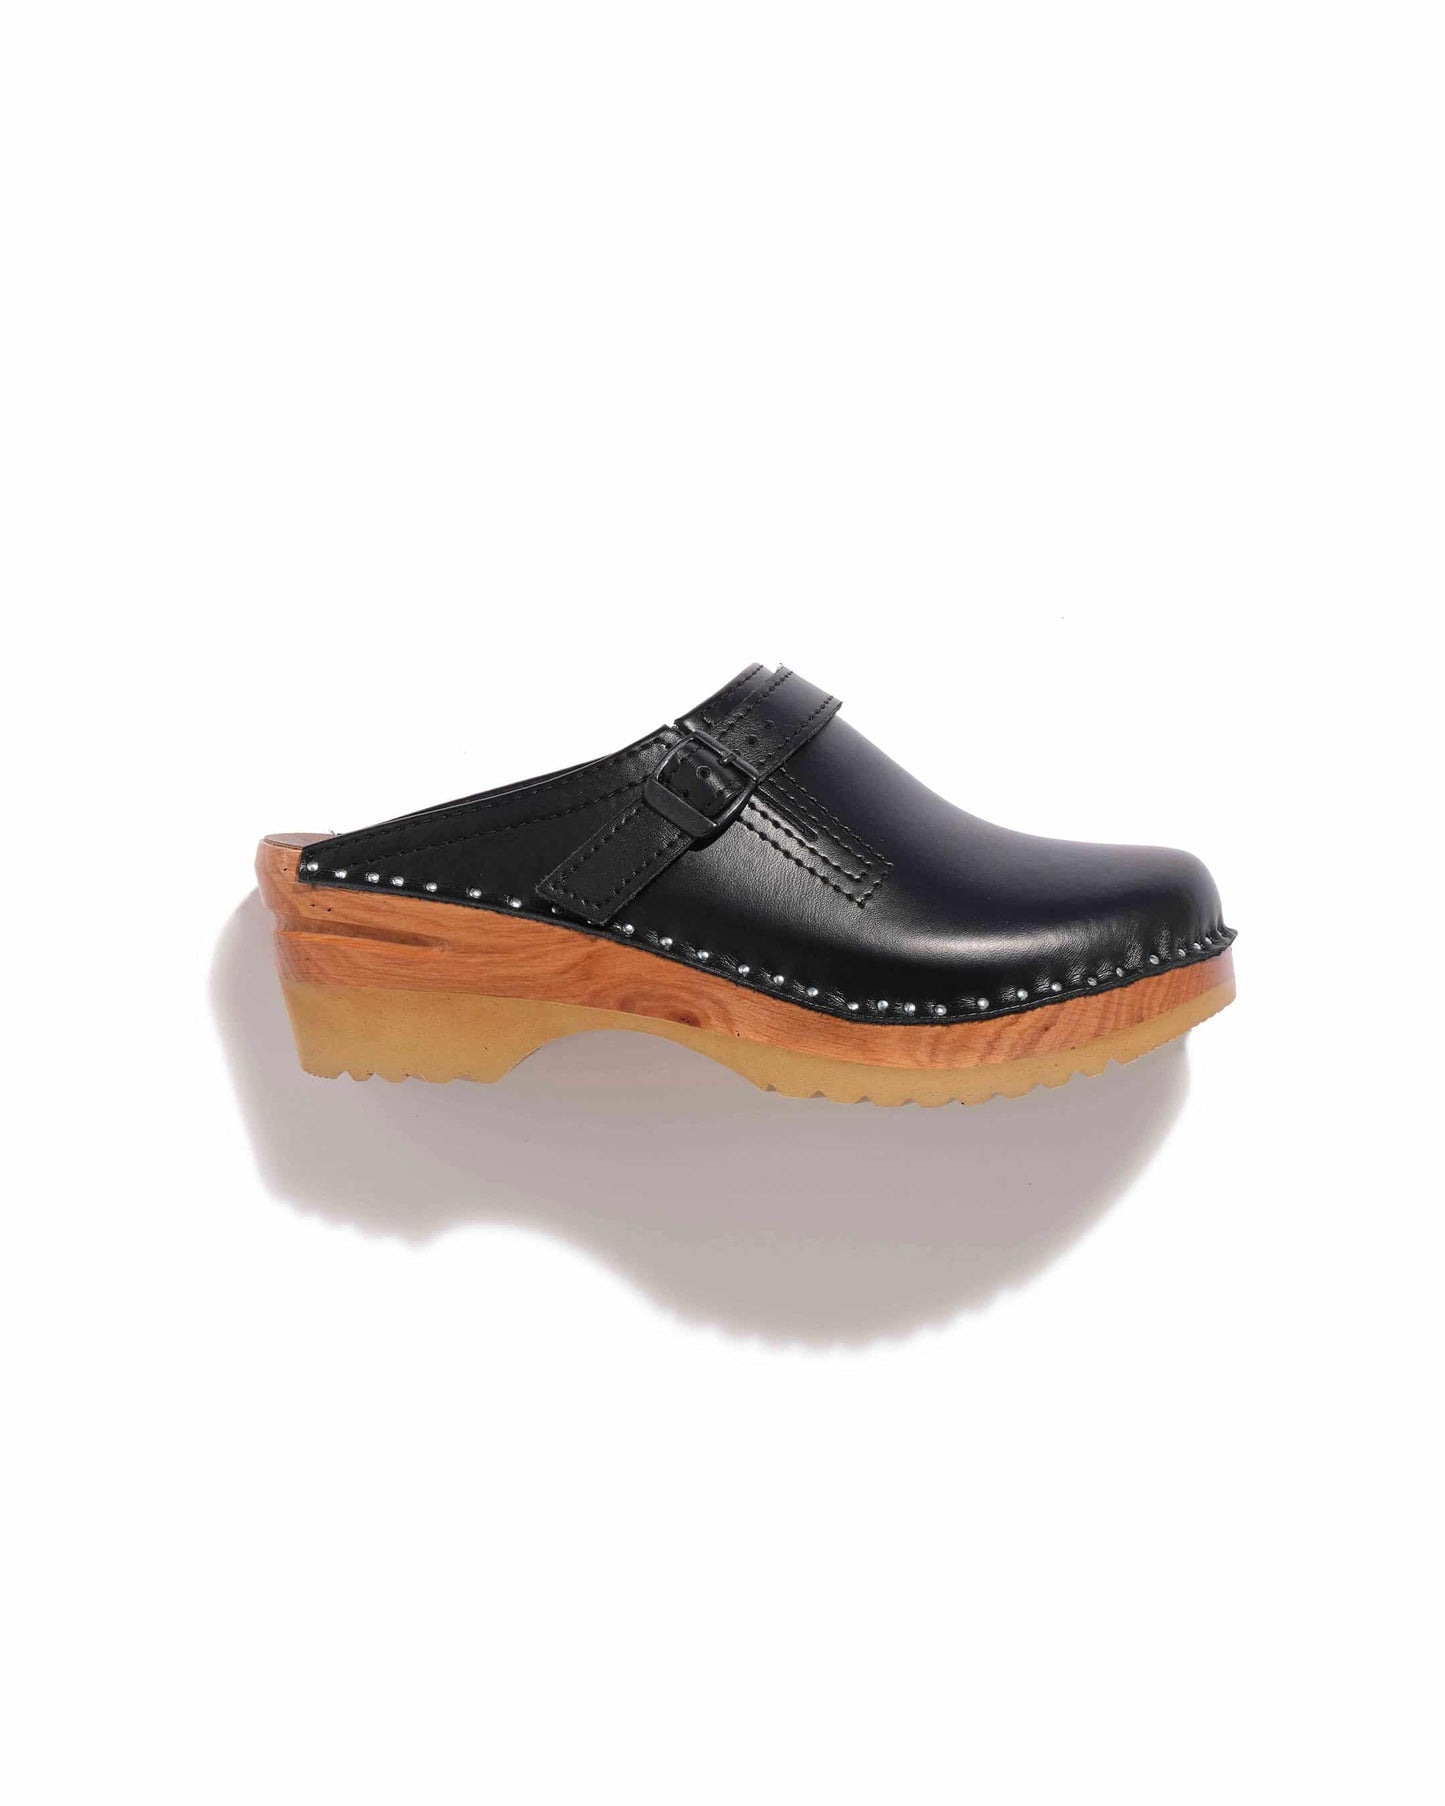 Work clogs with adjustable instep